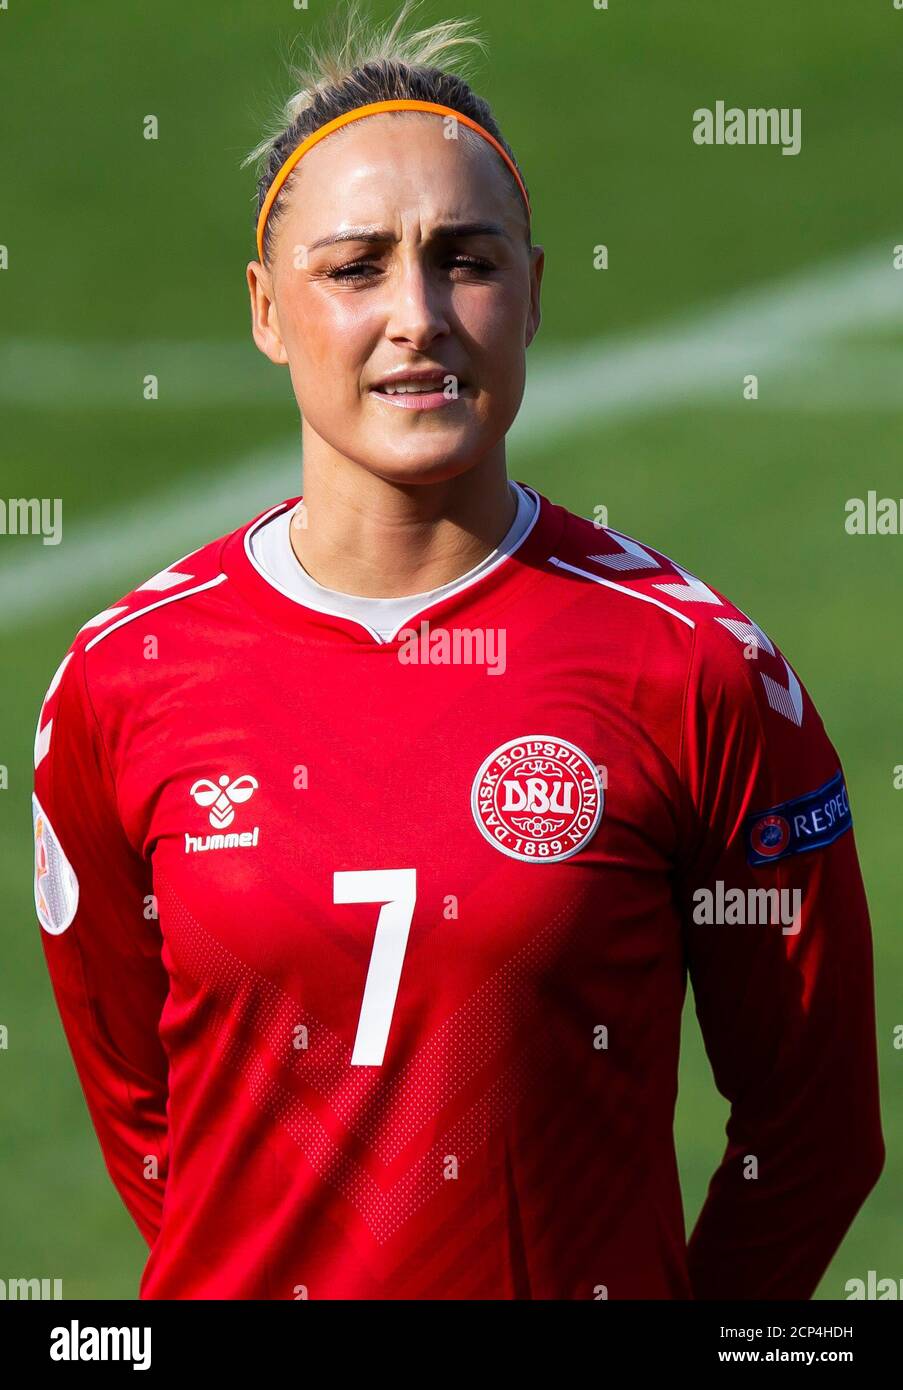 ZENICA, BOSNIA AND HERZEGOVINA - SEPTEMBER 17:  S.Troelsgaard of Denmark prior the UEFA Women's Euro Qualifying match between Bosnia and Herzegovina v Denmark at FF BH Football Training Centre on September 17, 2020 in Belgrade, Serbia. (Photo by Nikola Krstic/MB Media/Getty Images) Stock Photo